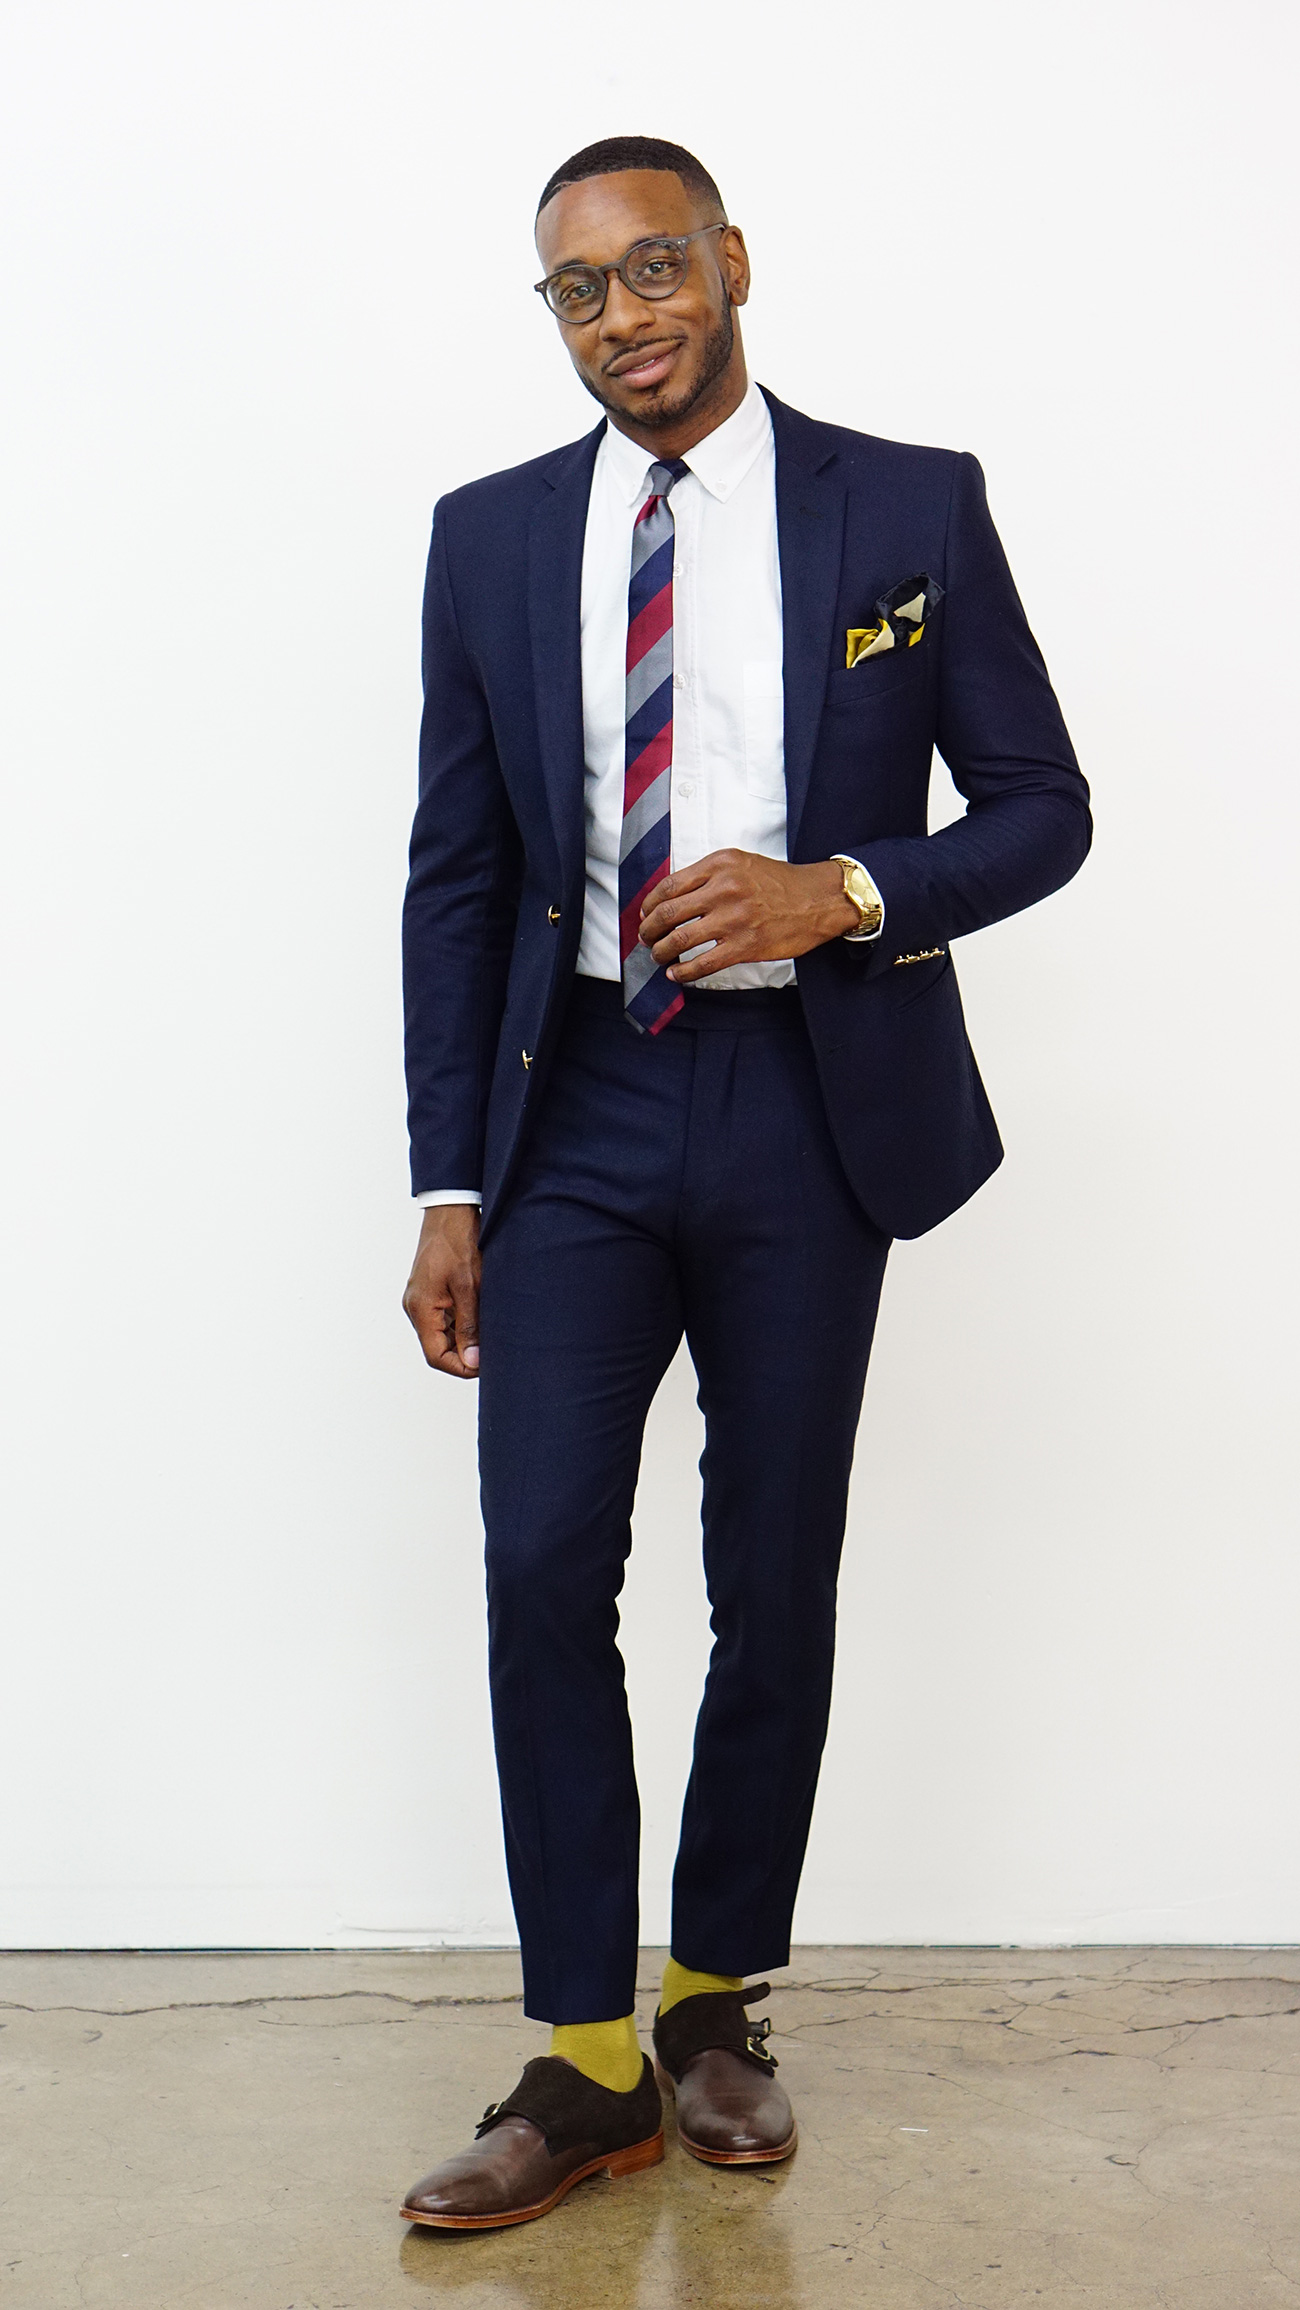 NEW VIDEO: HOW TO STYLE 1 SUIT 3 WAYS VIDEO – Norris Danta Ford